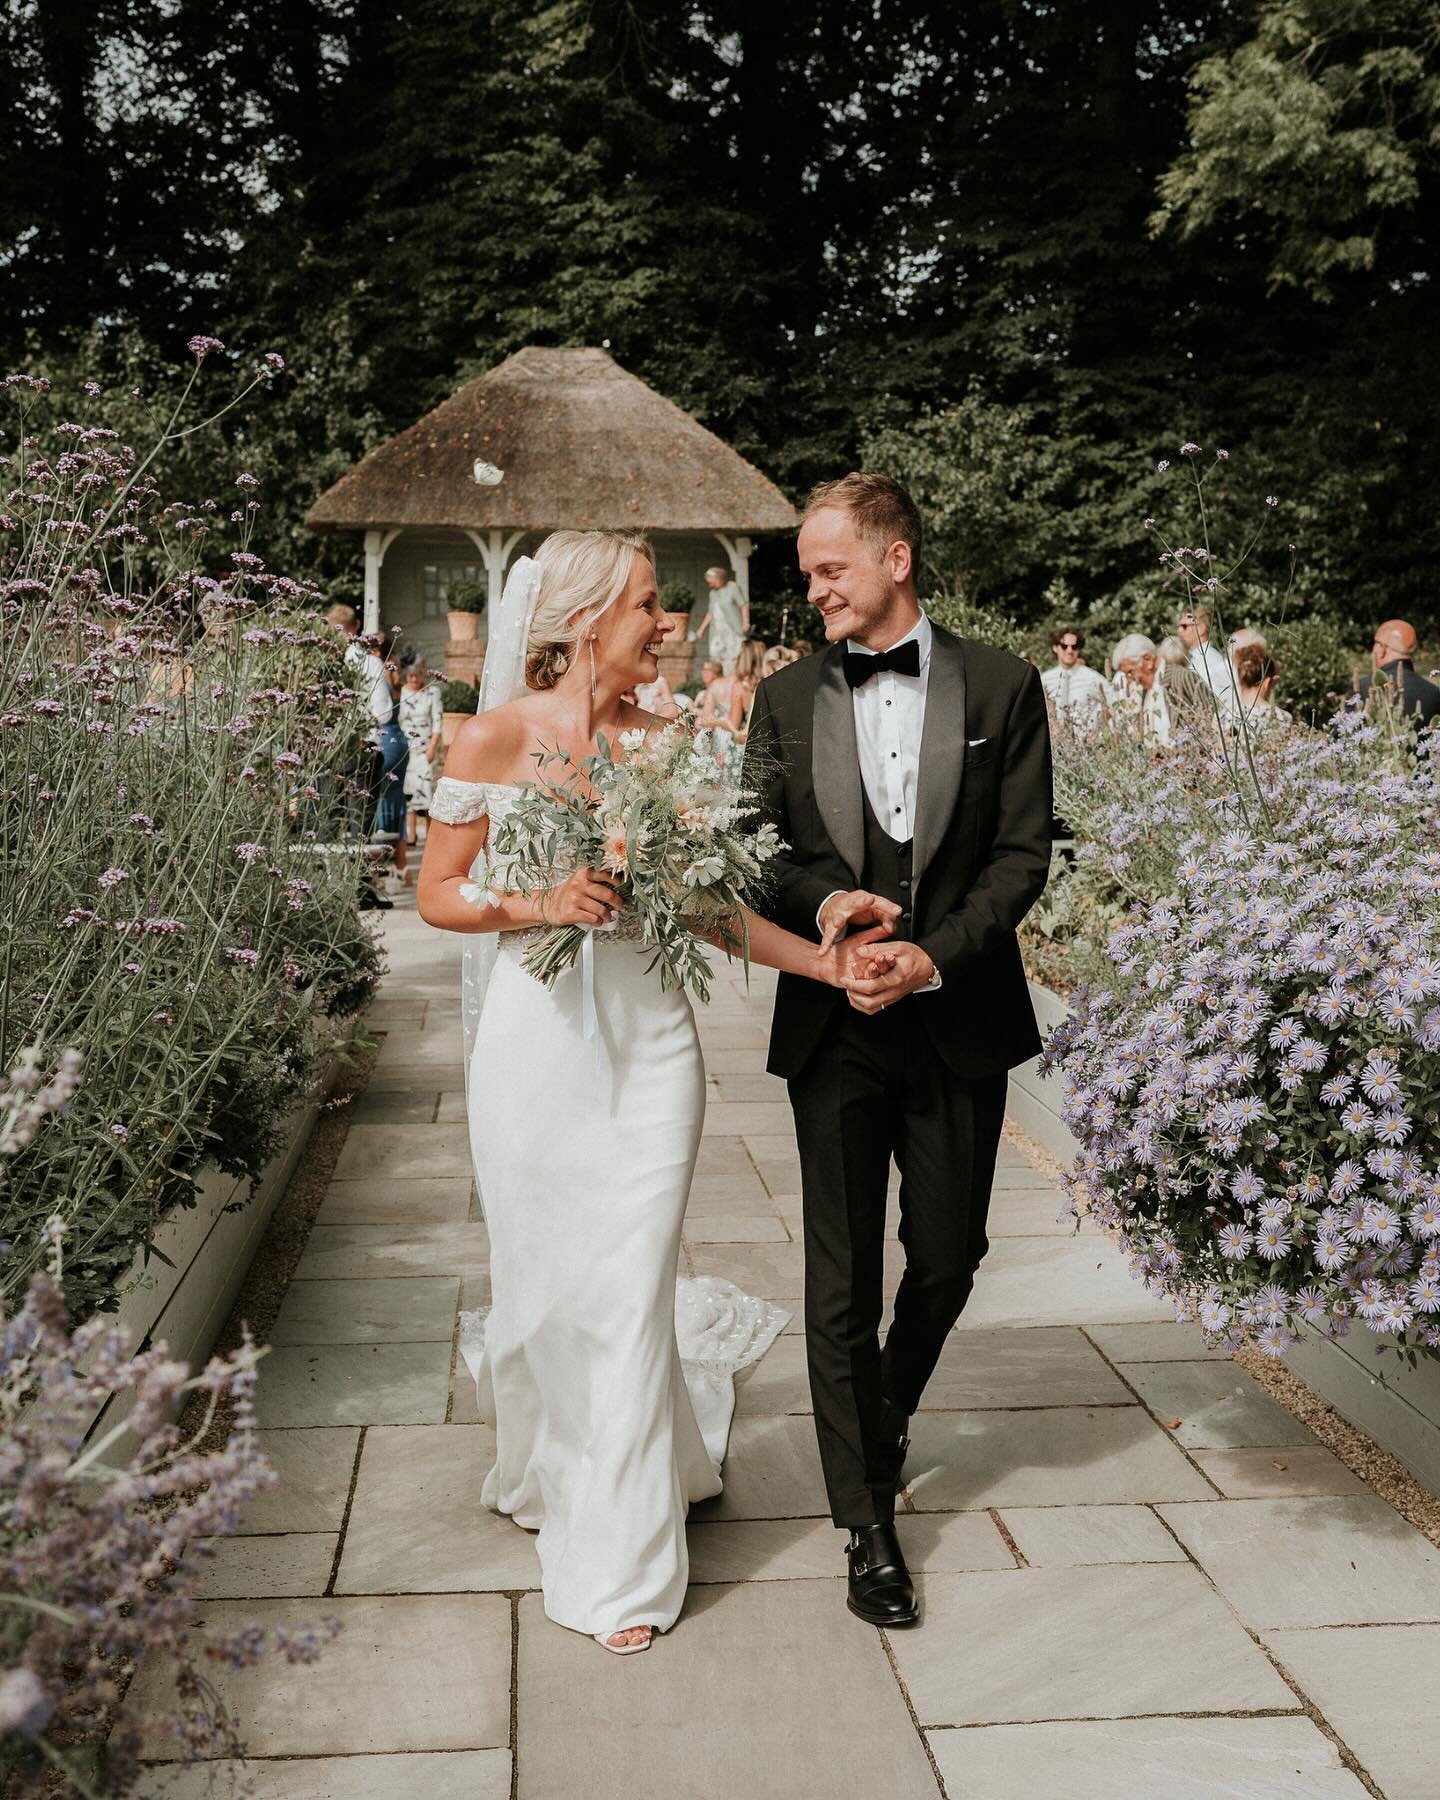 Romantic, stylish and timeless. Soulful wedding photography captured with best friend energy. 

I&rsquo;m there for the heart skipping moments, tender touches and jam packed dance floors. Whether it&rsquo;s an epic country house party or an intimate 